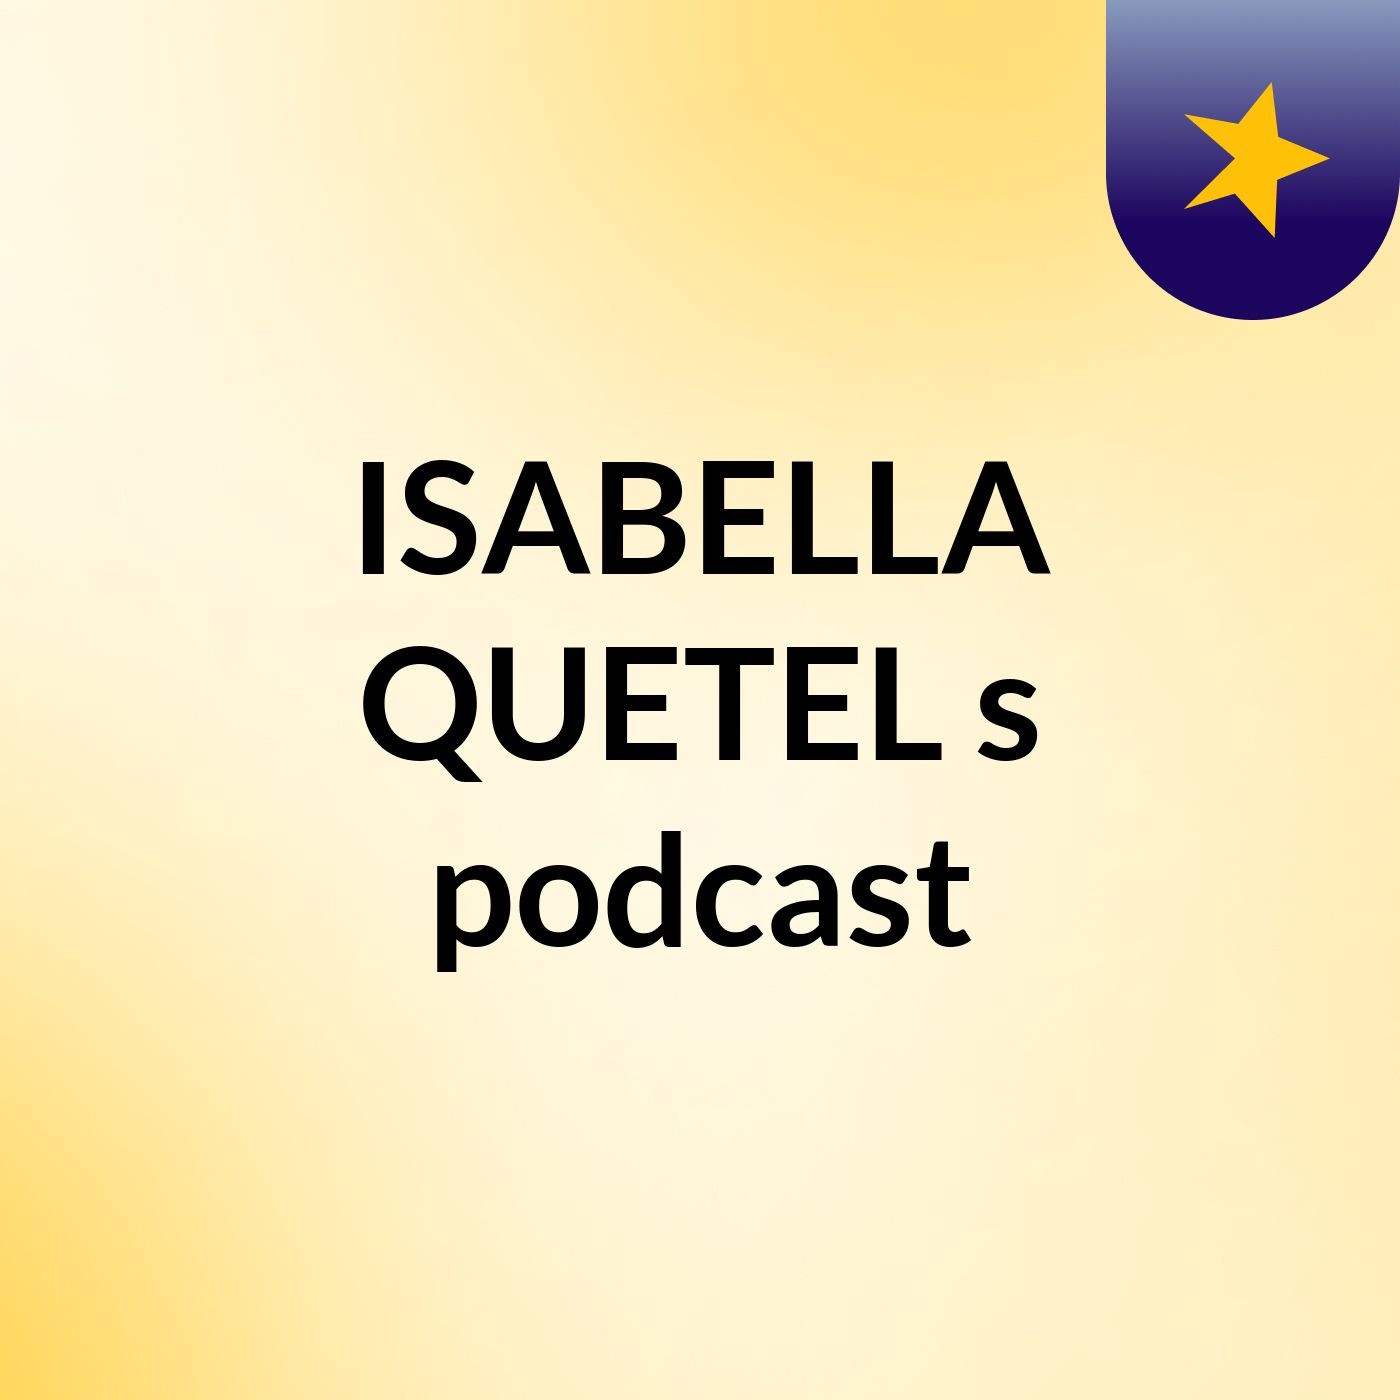 ISABELLA QUETEL's podcast